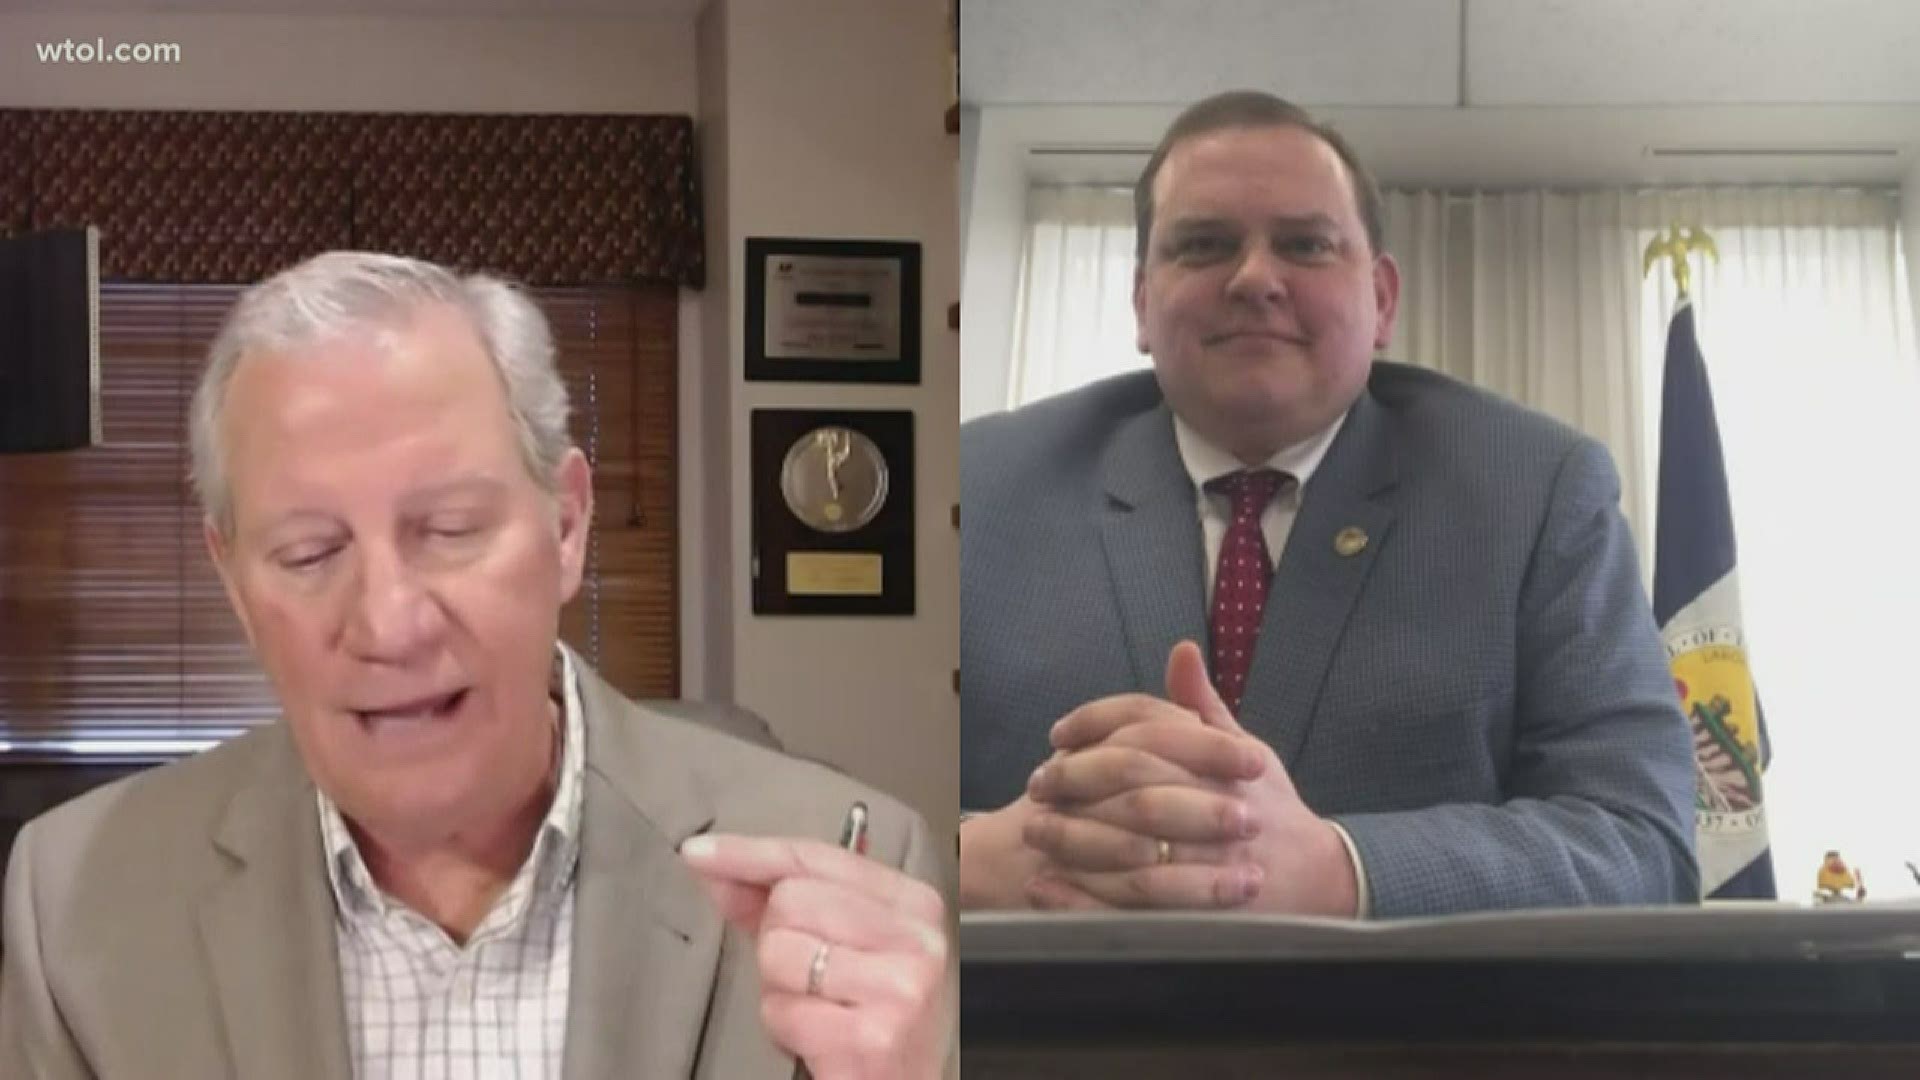 Toledo Mayor Wade Kapszukiewicz talks to Jerry Anderson via Skype on the defeat of Issue 1, which would raise taxes, and the coronavirus pandemic.